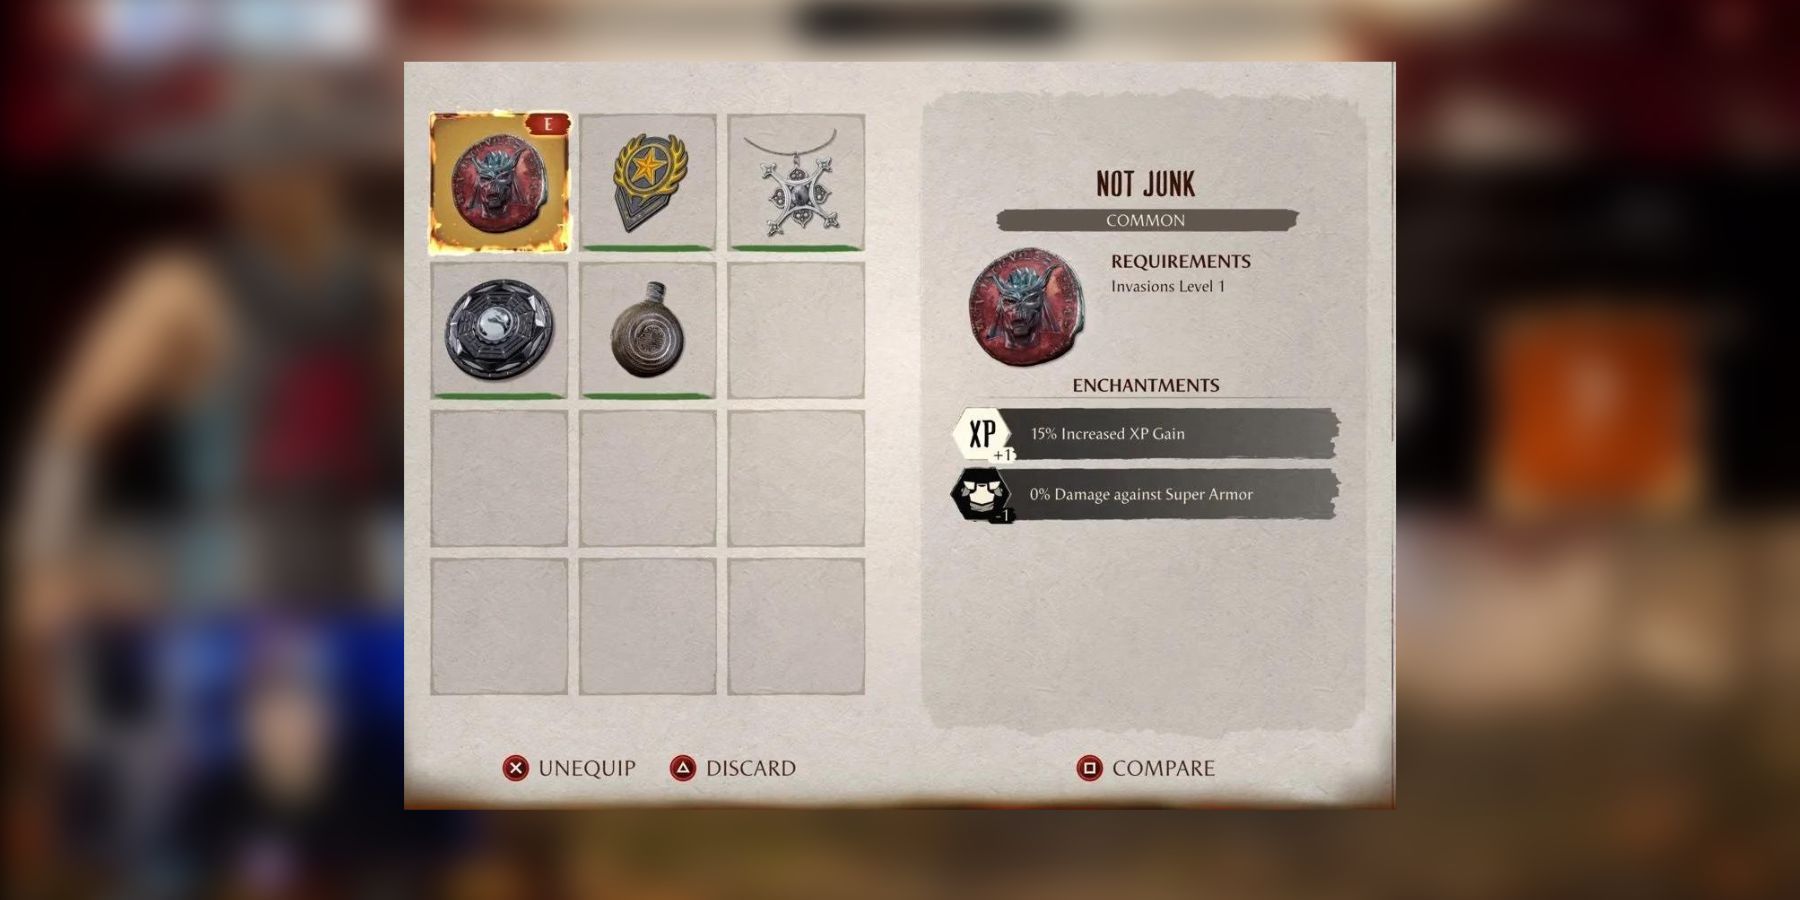 image showing a not junk relic in mortal kombat 1. 